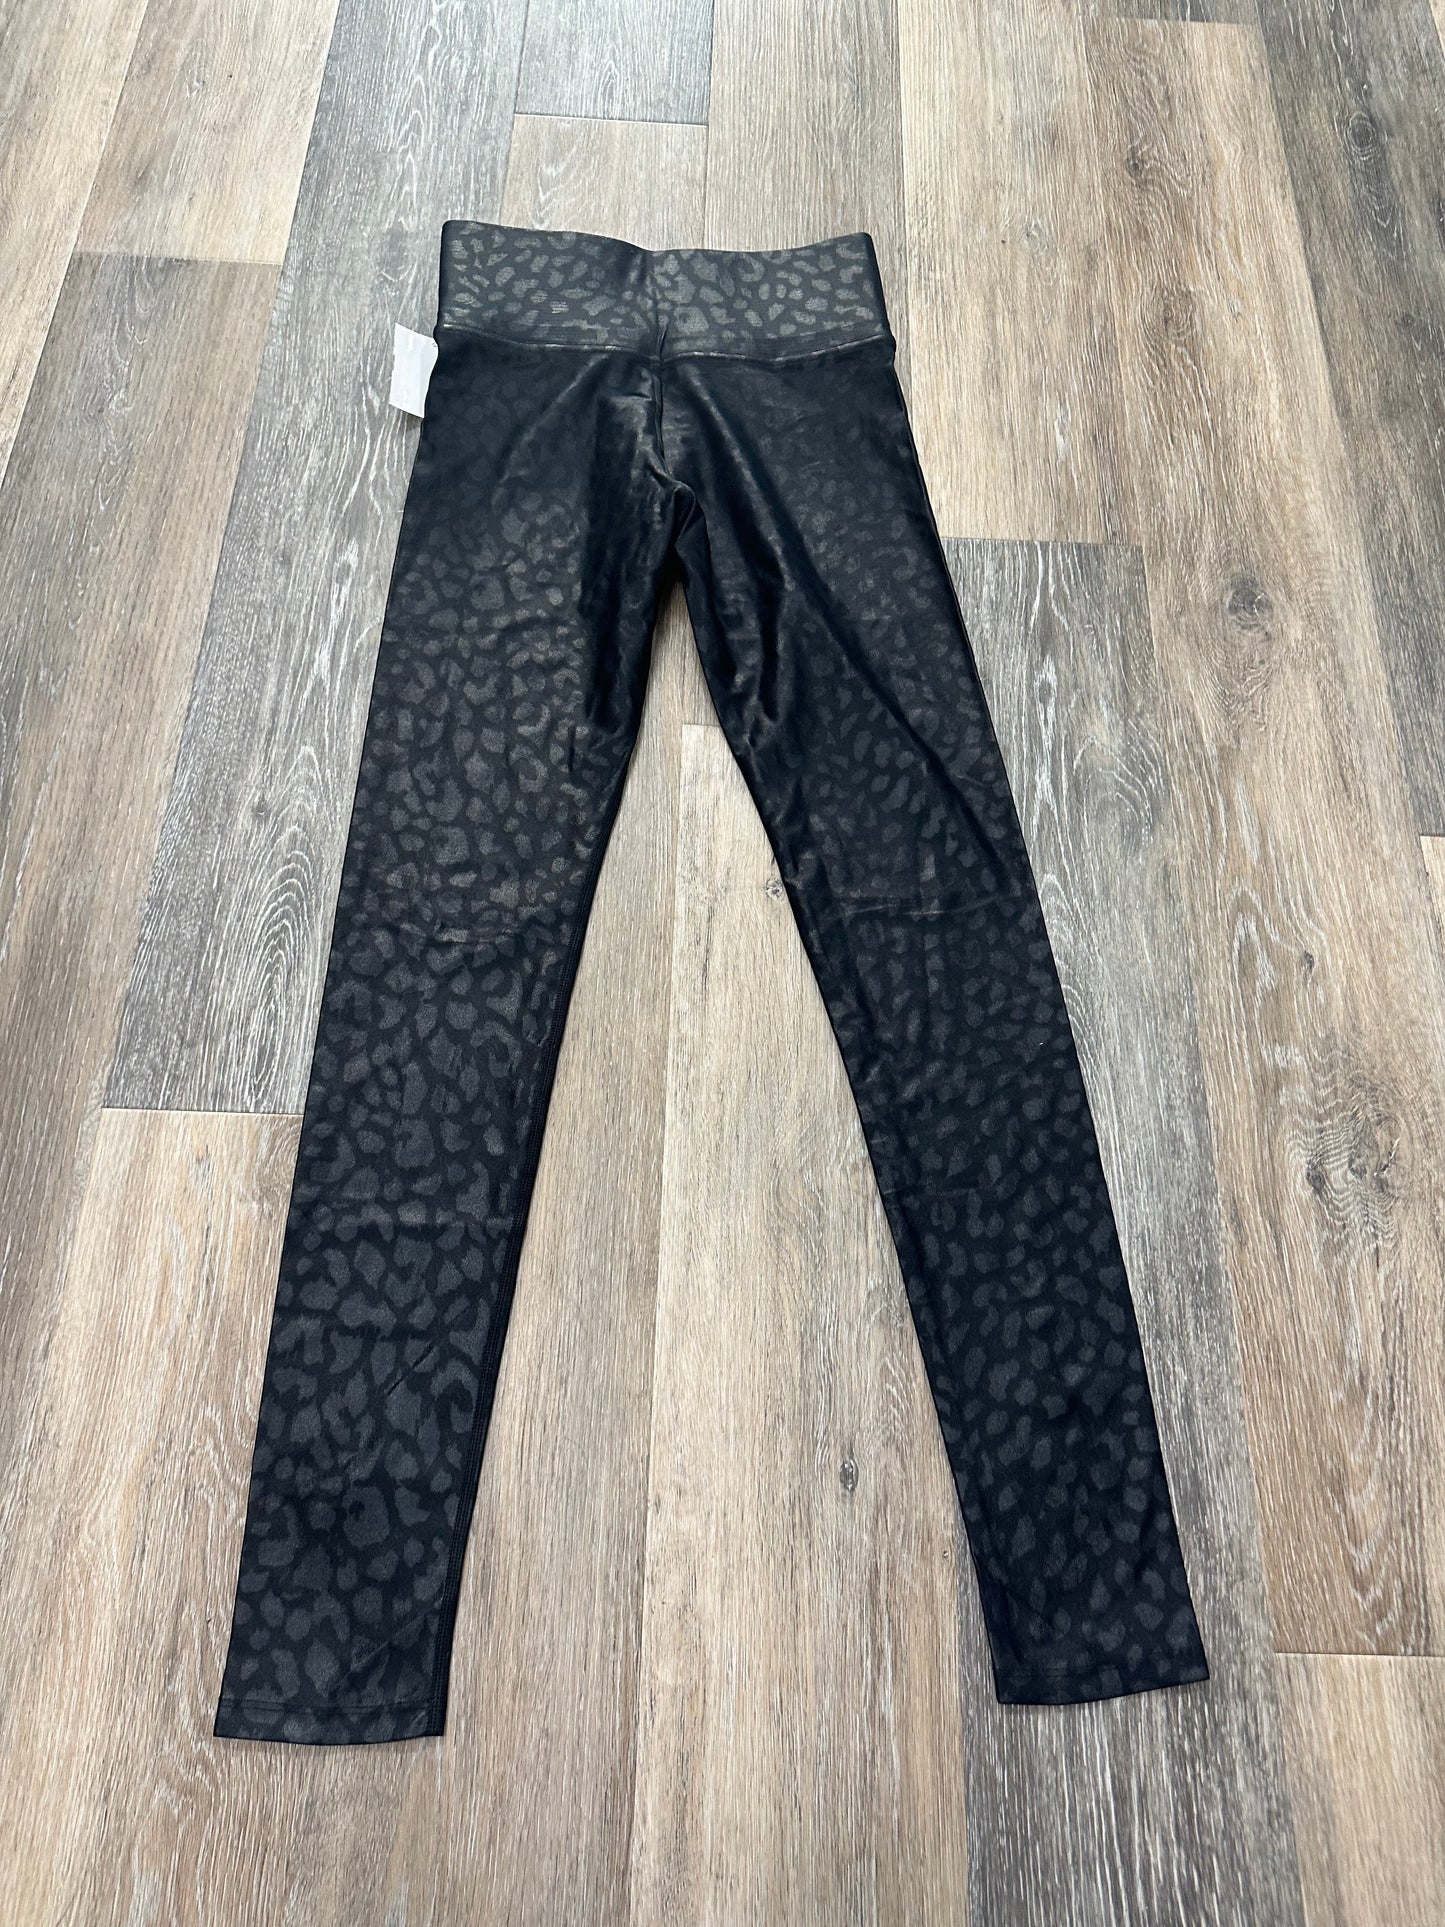 Athletic Leggings By Carbon 38 Size: S